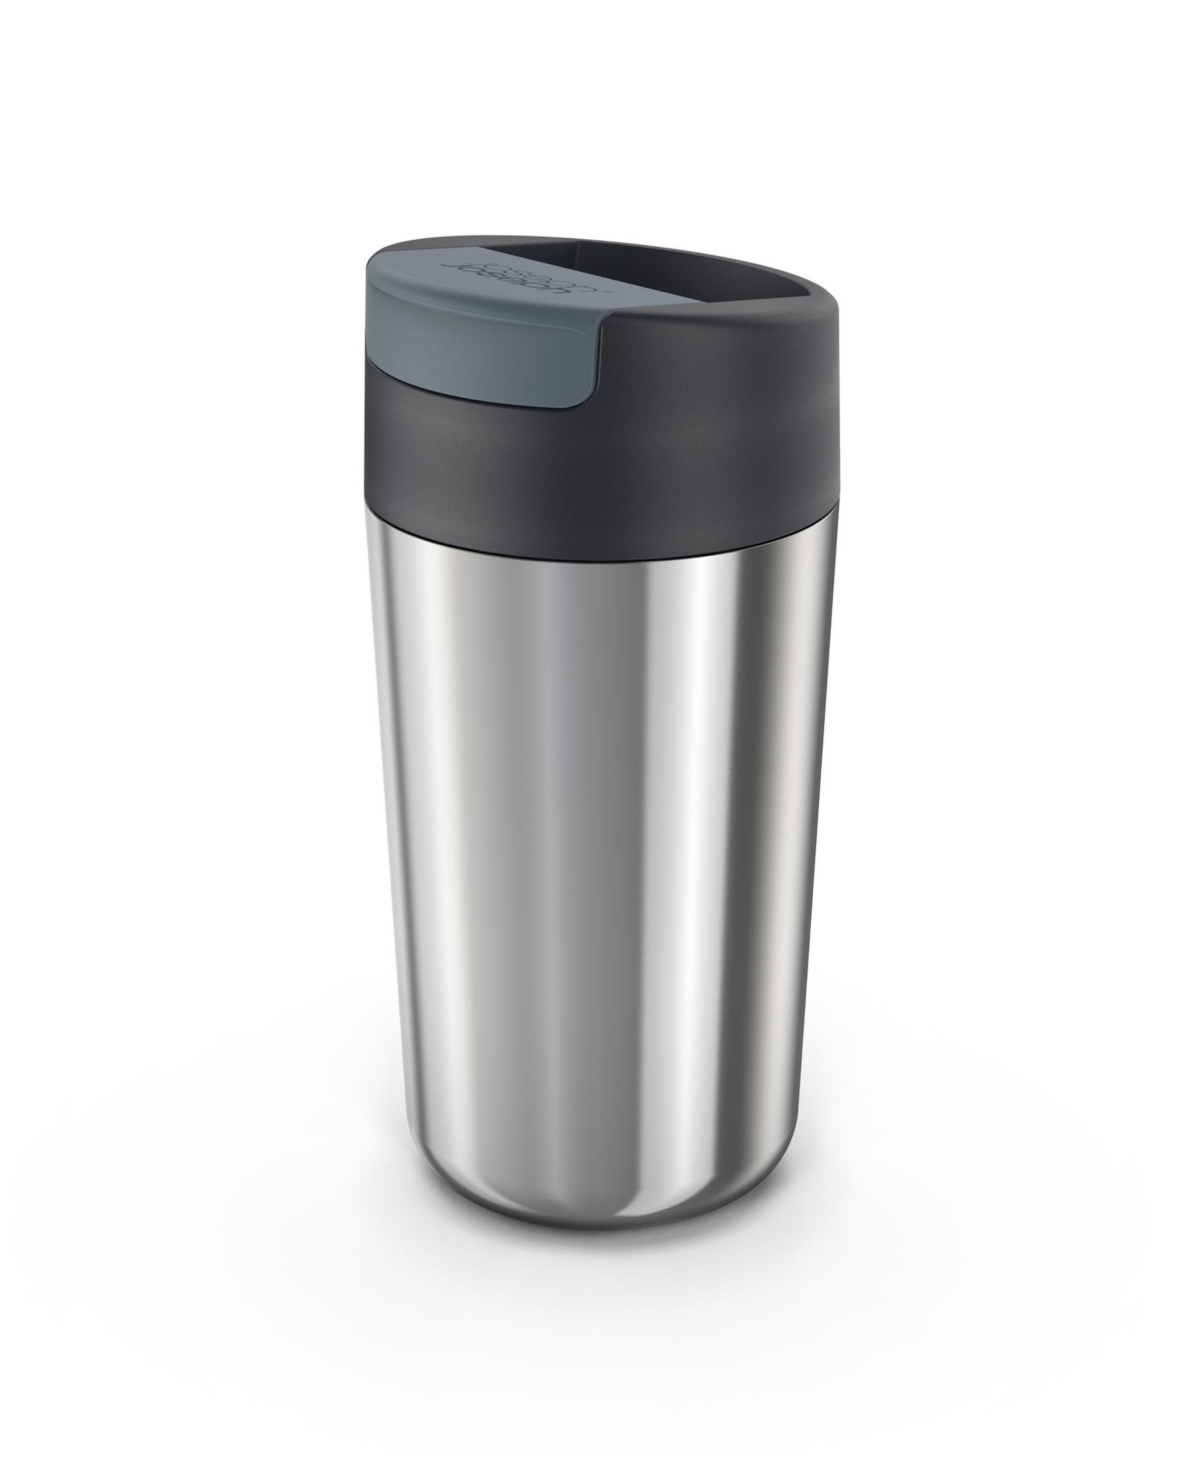 Sipp Steel Stainless-Steel Travel Mug with Flip-Top Cap,16 oz - Anthracite